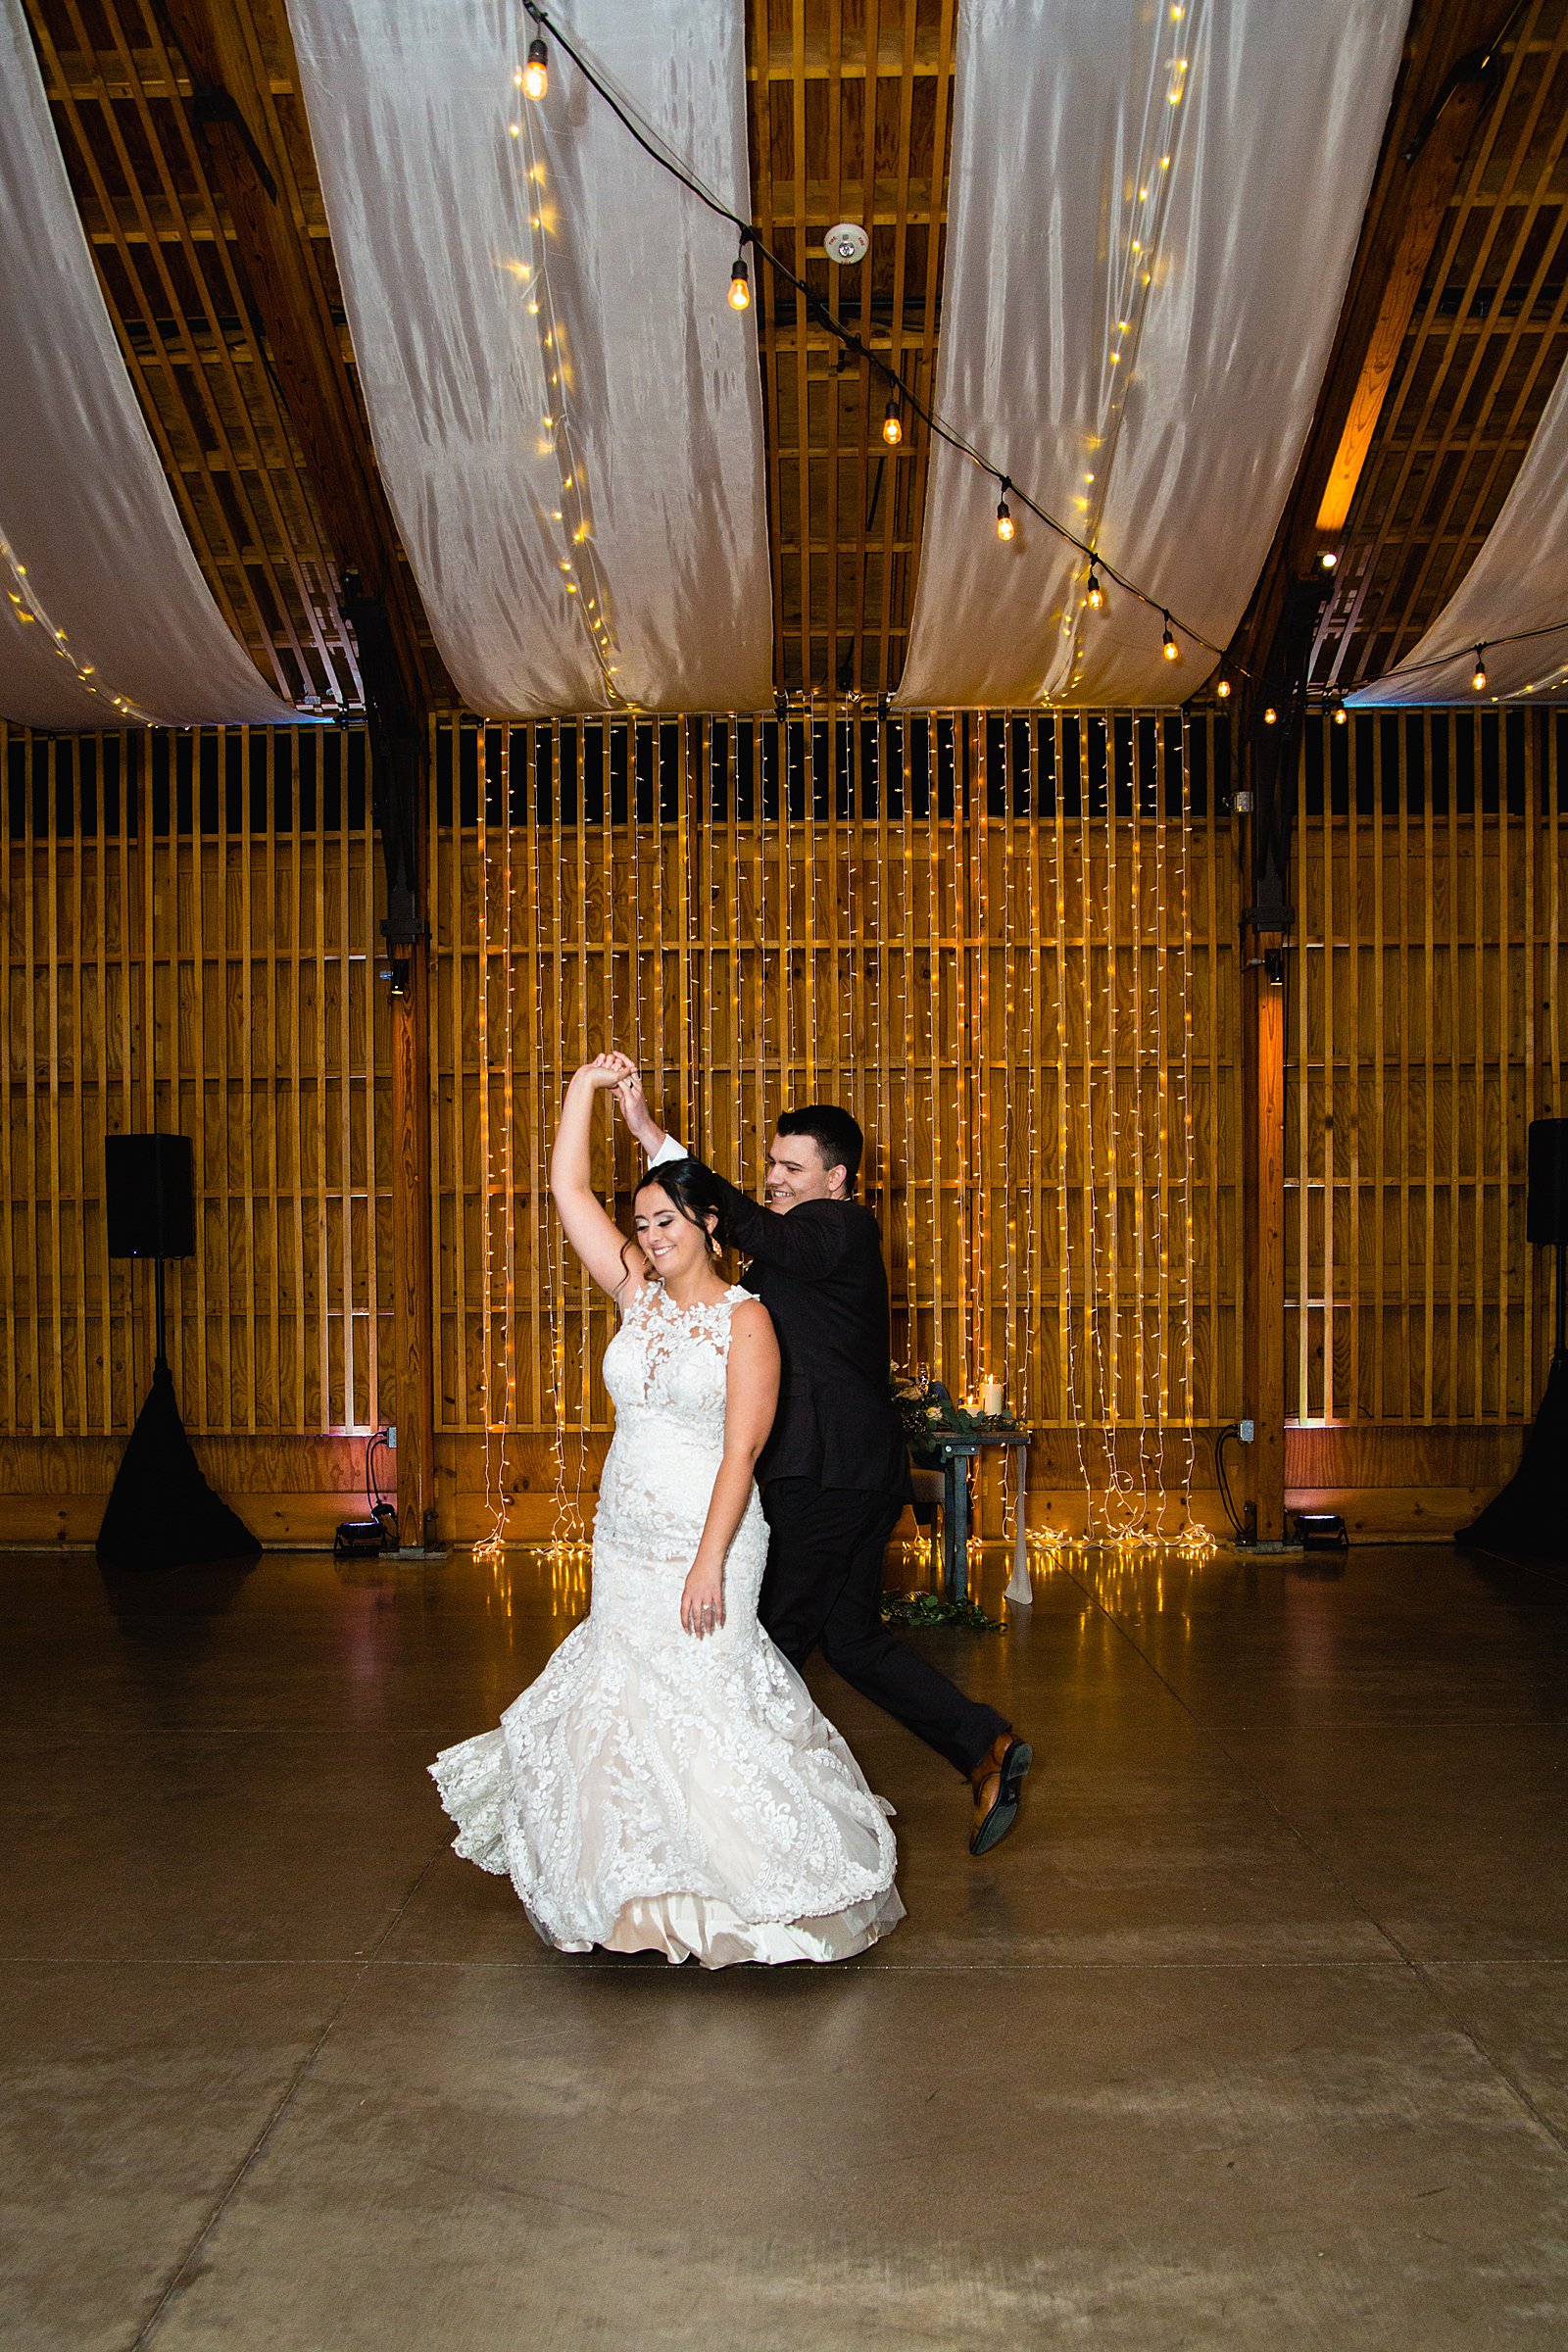 Bride and Groom sharing first dance at their The Paseo wedding reception by Arizona wedding photographer PMA Photography.